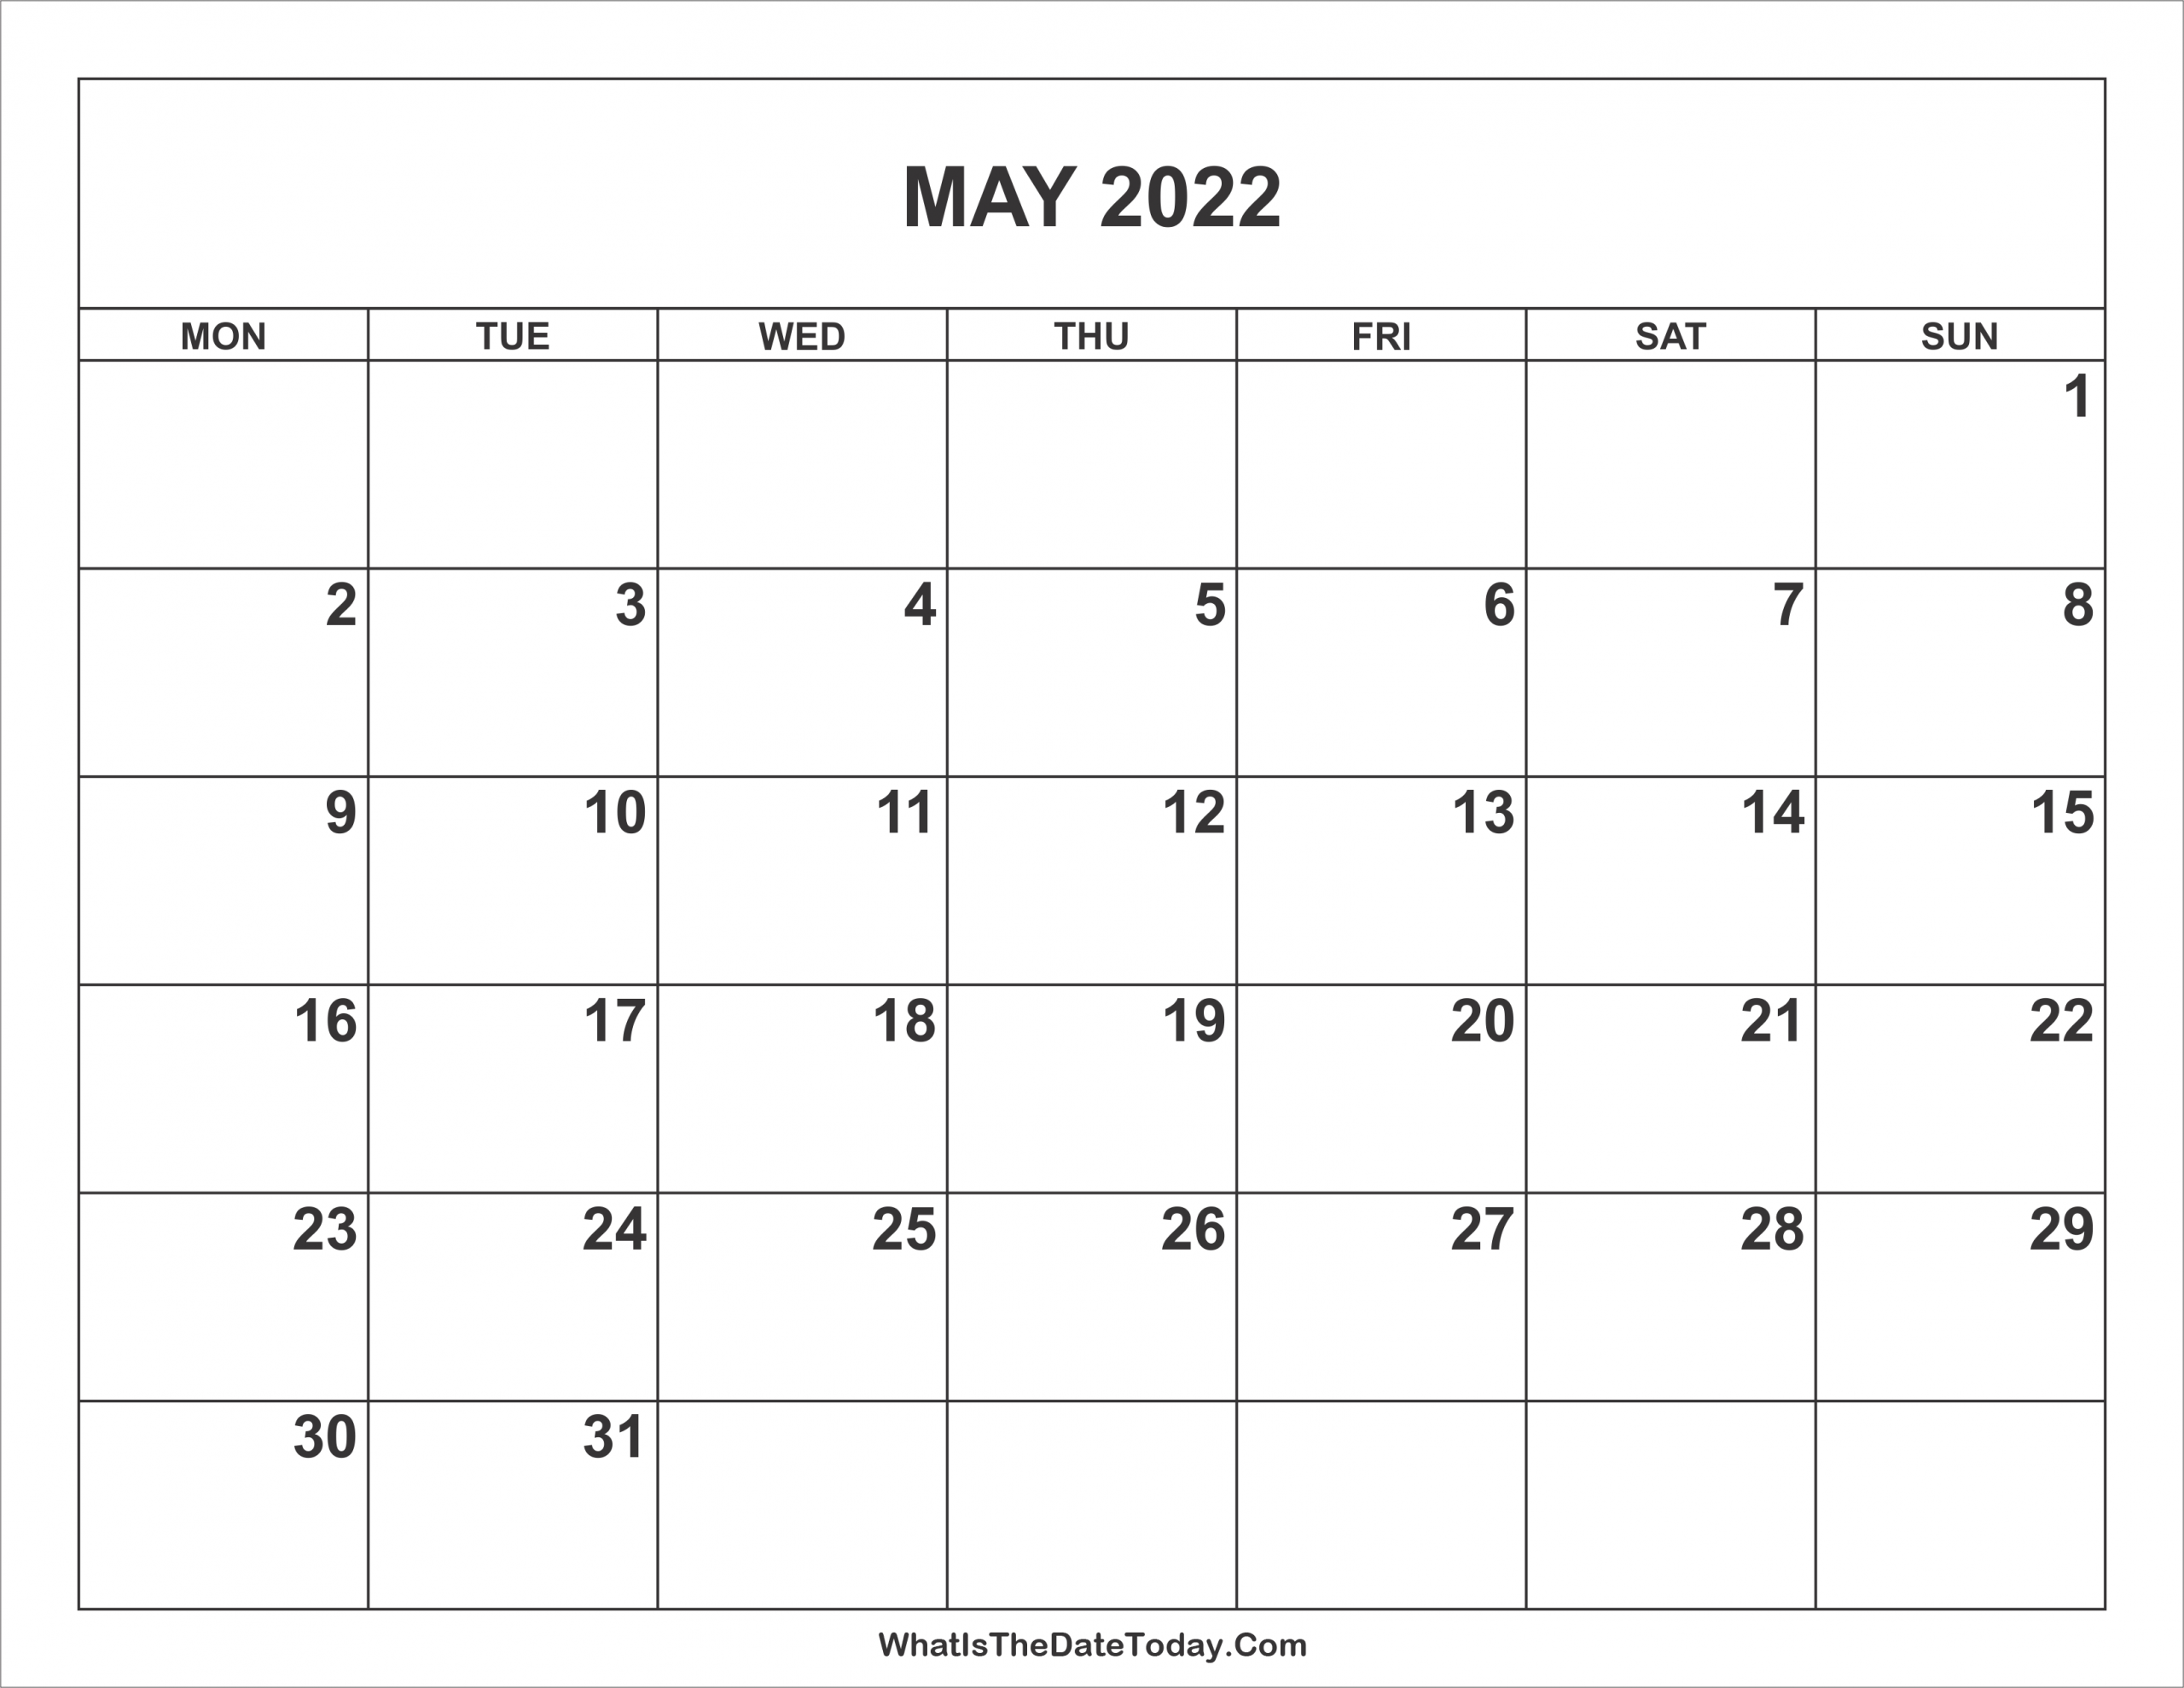 May 2022 Calendar | Whatisthedatetoday